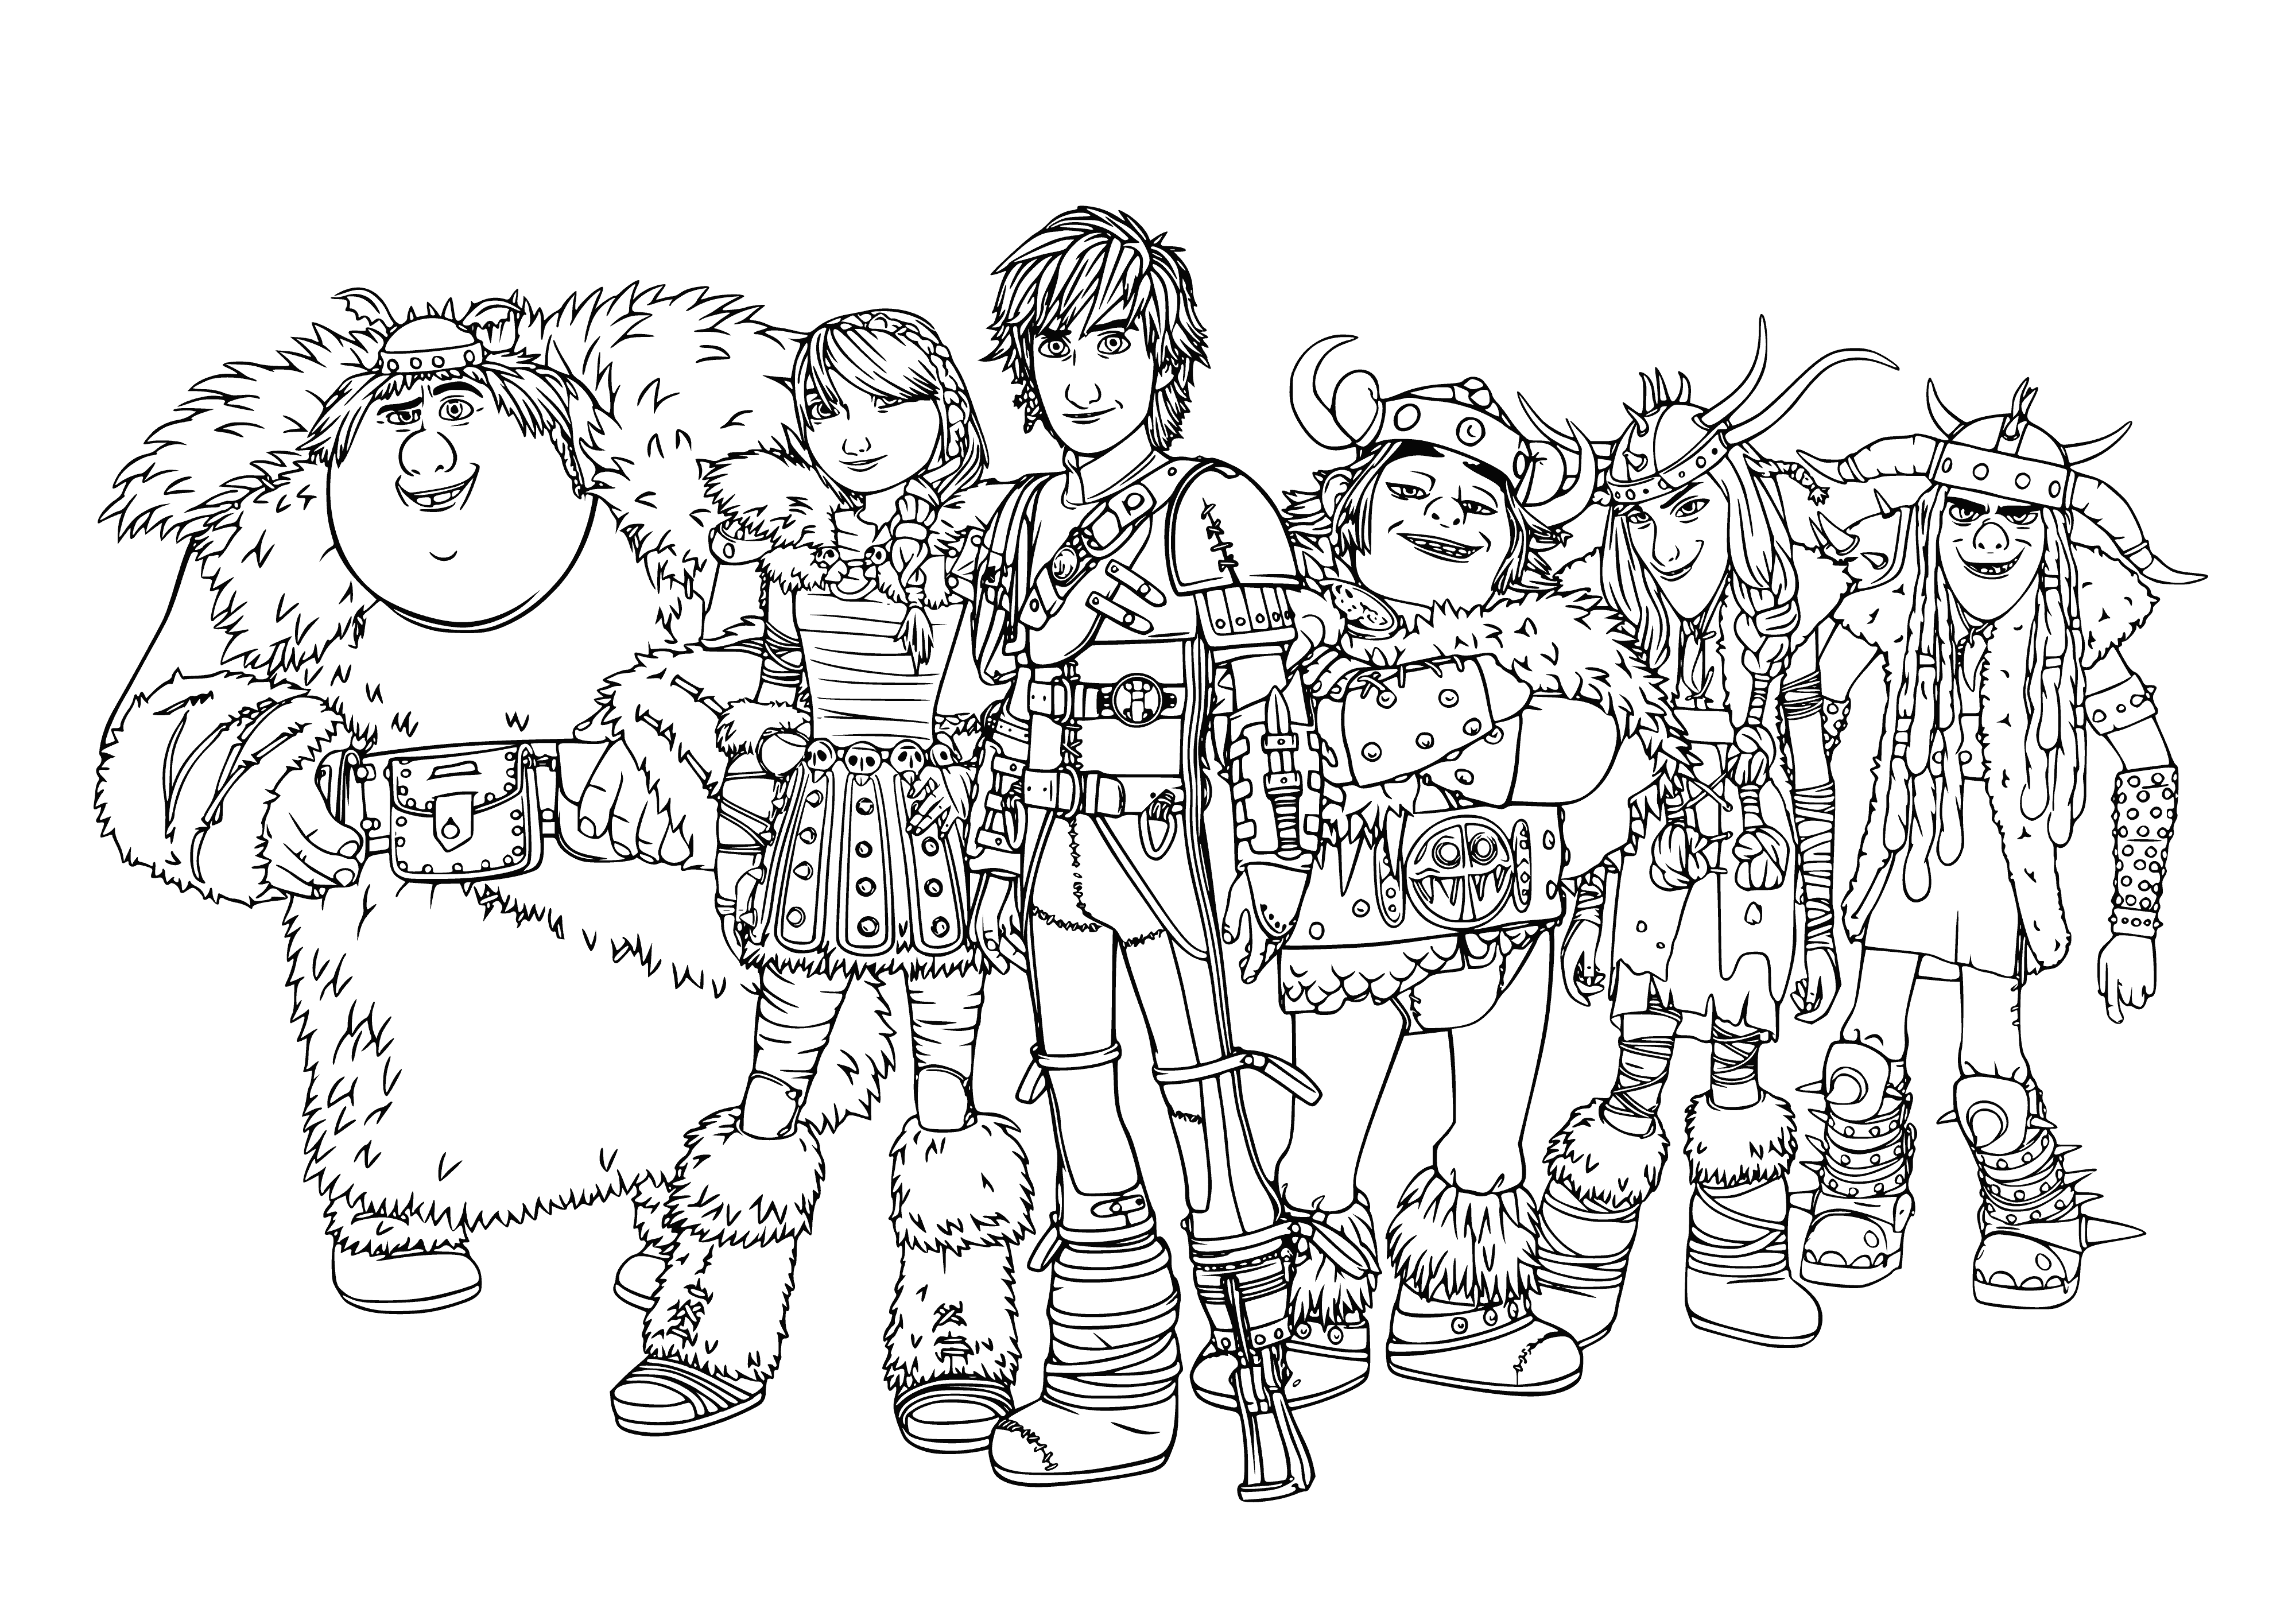 Dragon riders coloring page